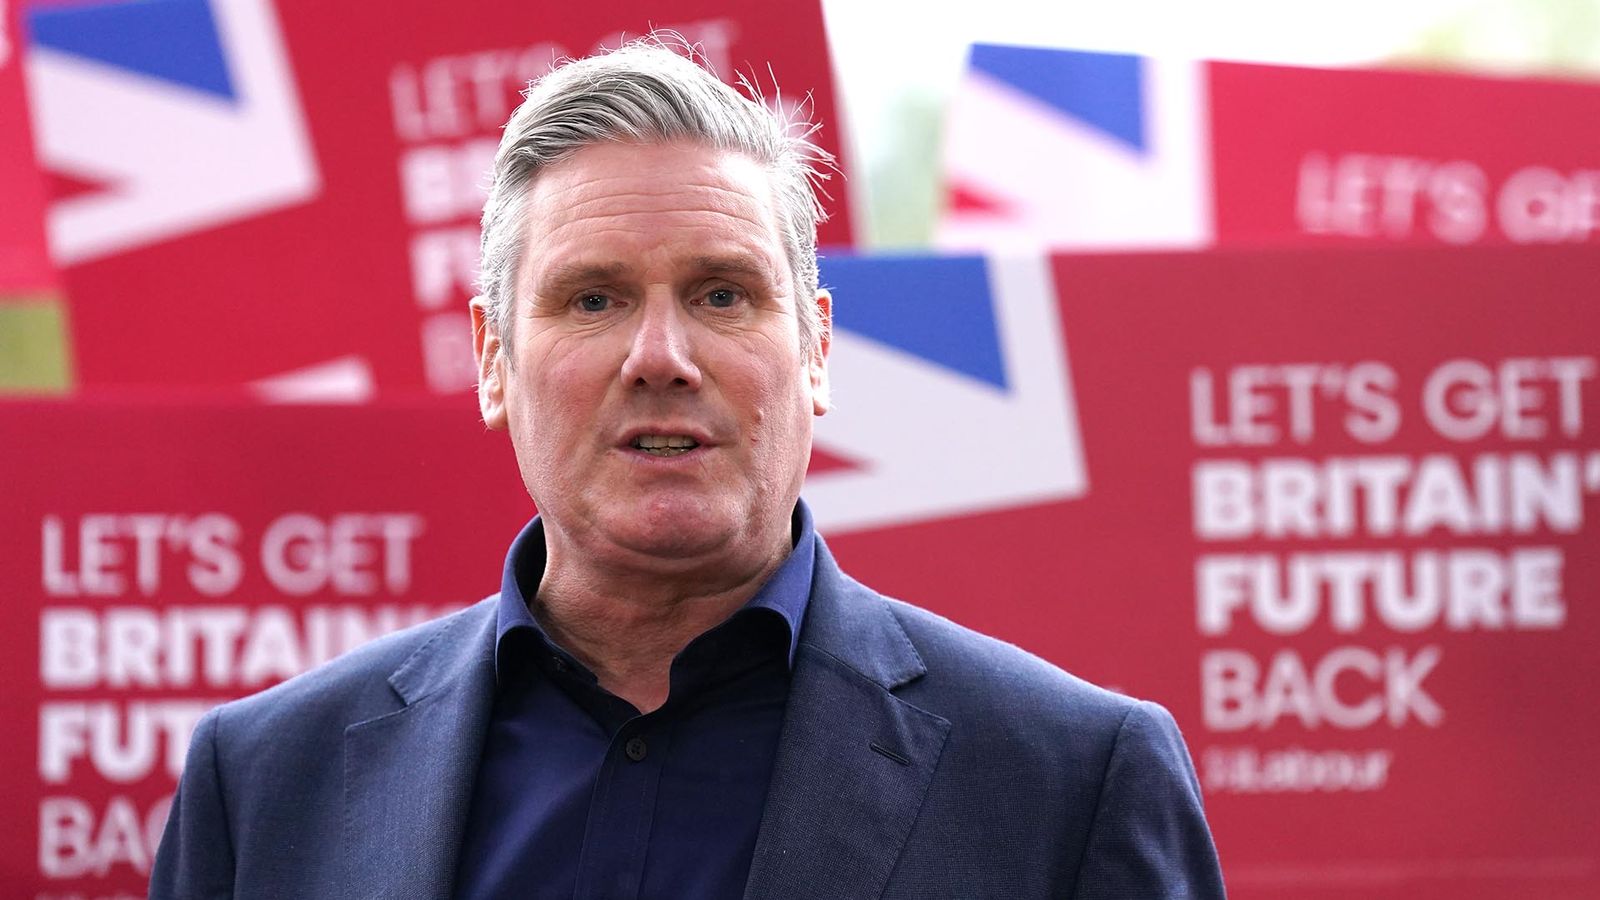 Sir Keir Starmer insists there is 'unity' in Labour as he continues to resist calls to back ceasefire in Israel-Hamas war